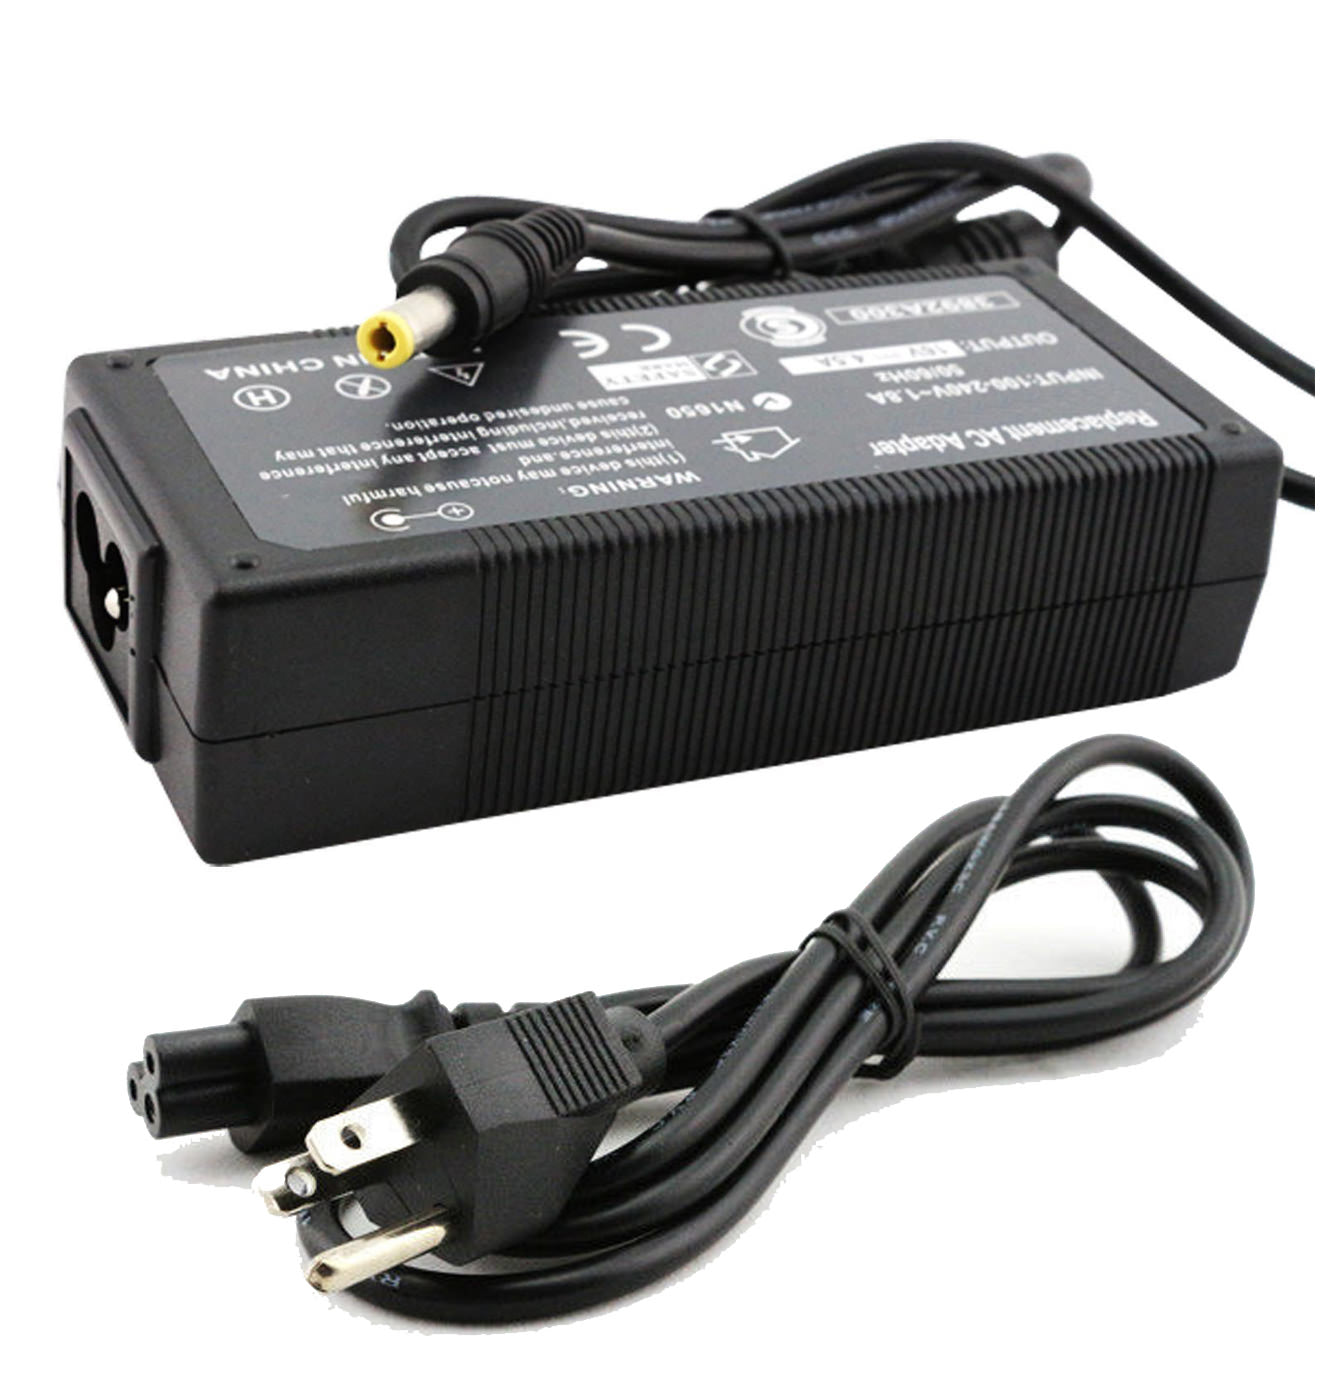 AC Adapter Charger for IBM ThinkPad R50 Notebook.